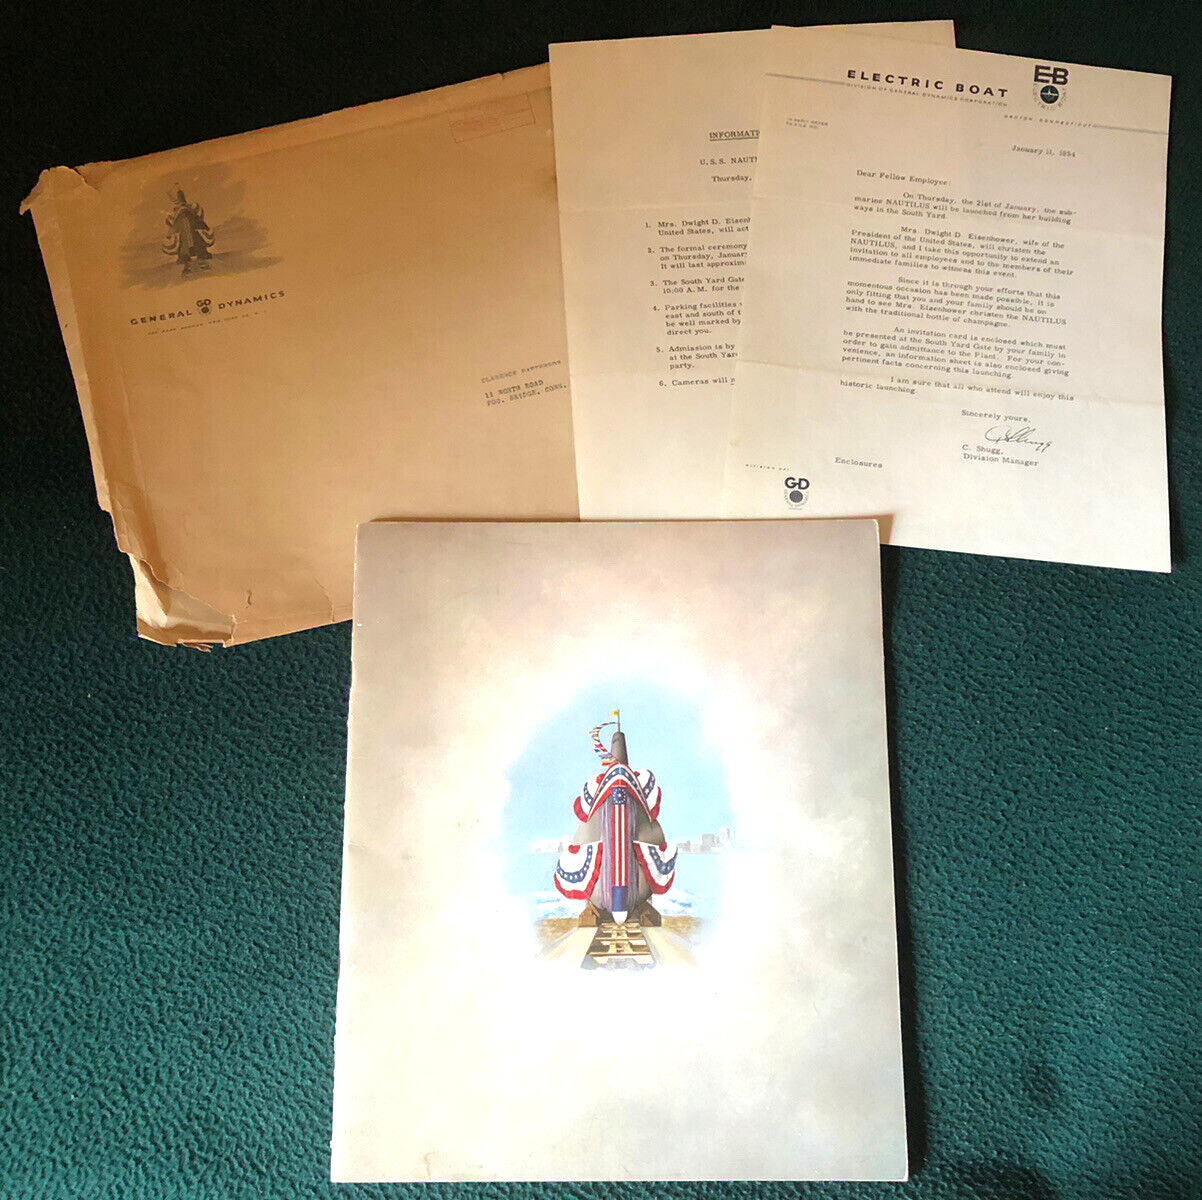 USS NAUTILUS 1954 Official Launching Day Program + Invitation Letter & Info Page